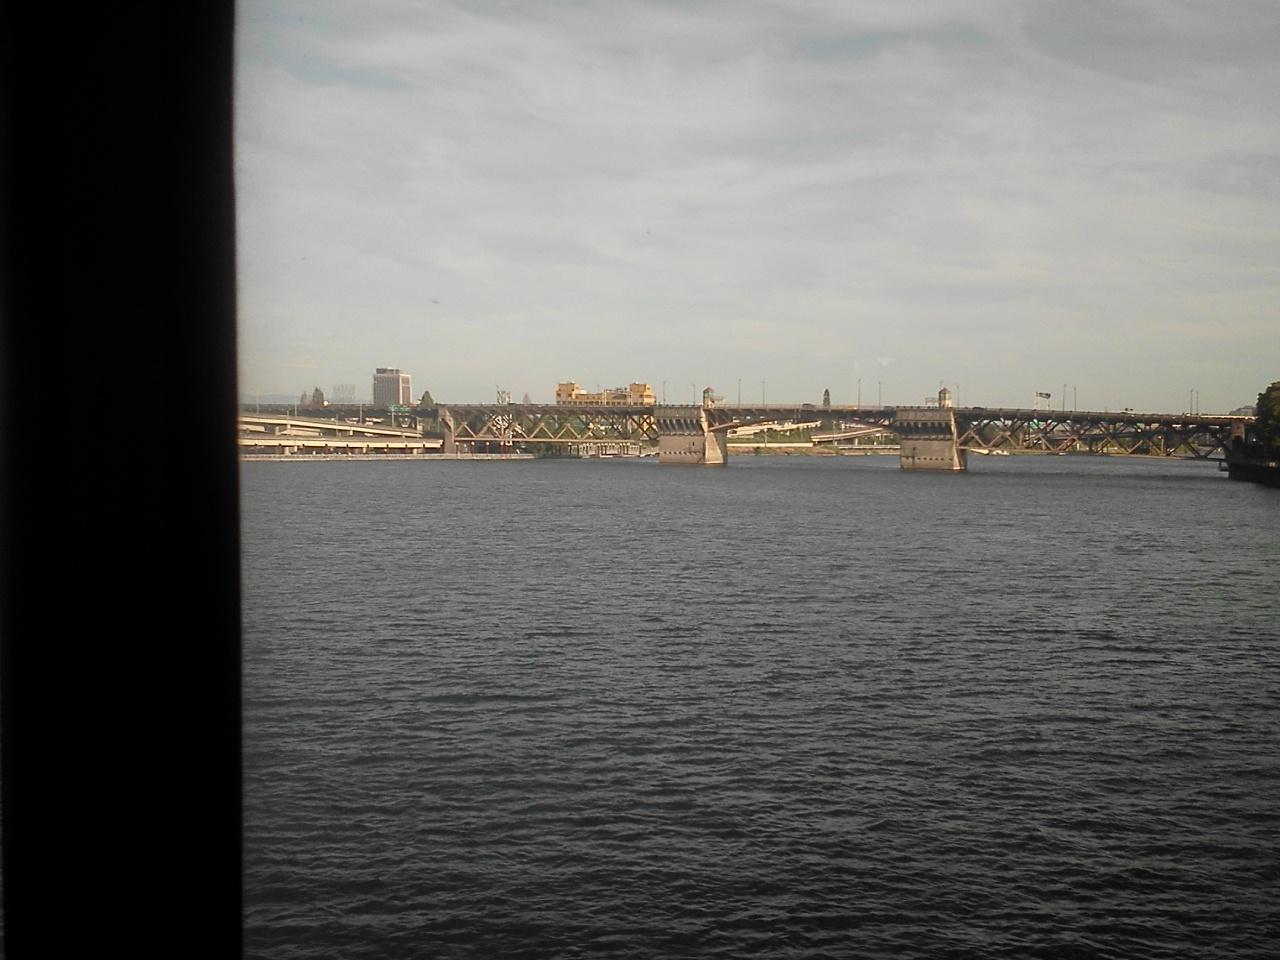 Coming over the river into Portland